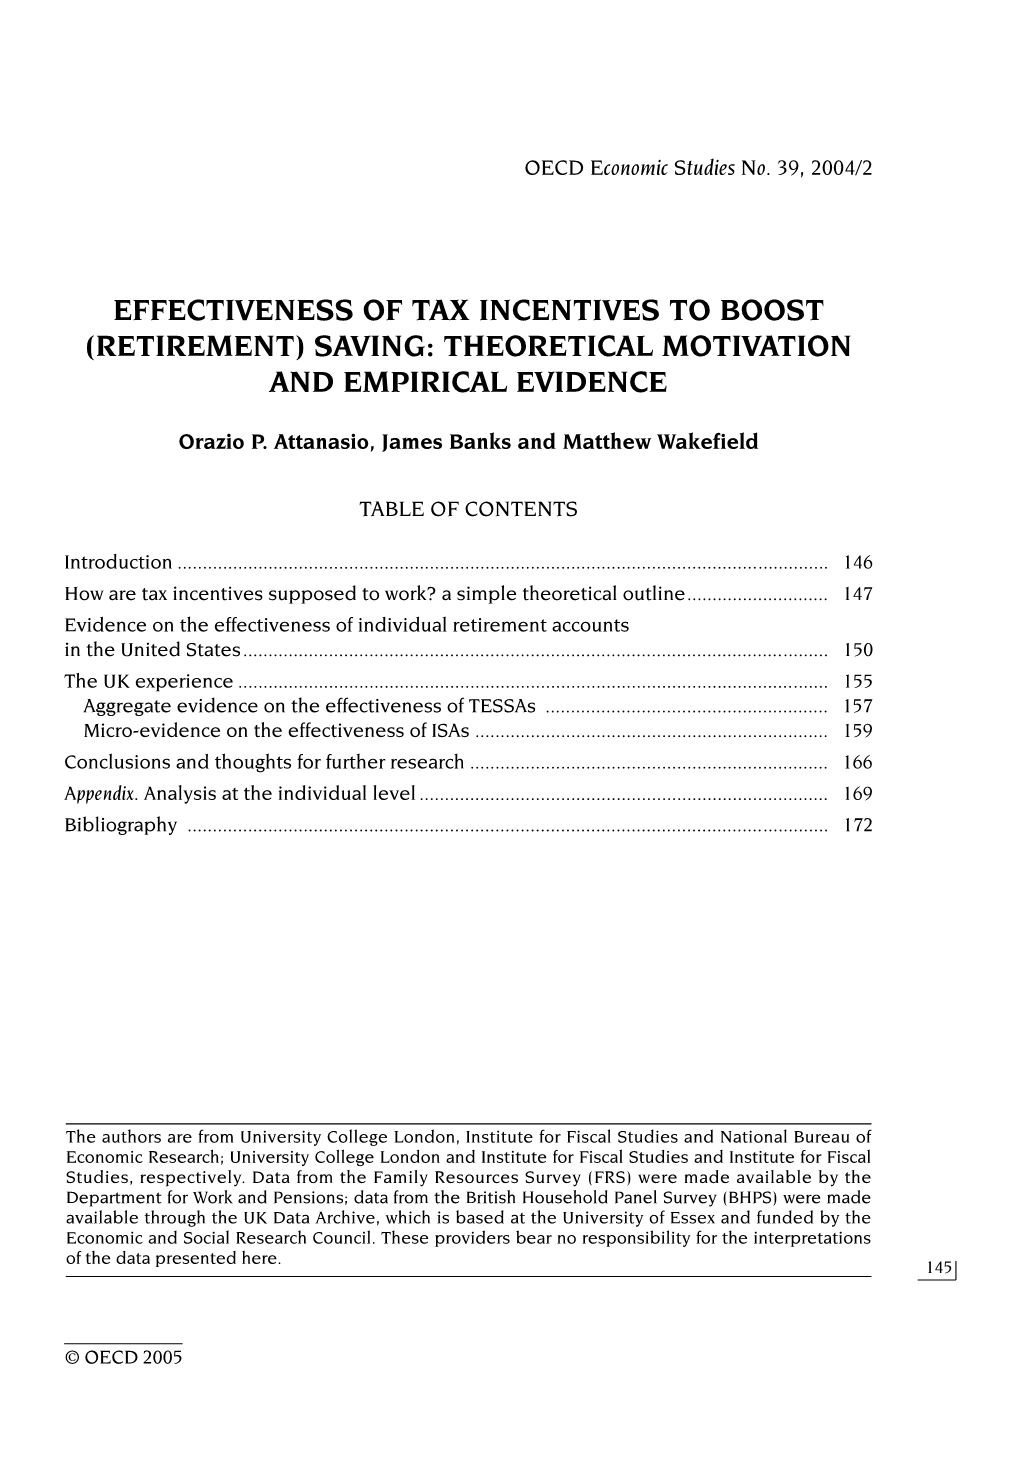 Effectiveness of Tax Incentives to Boost (Retirement) Saving: Theoretical Motivation and Empirical Evidence